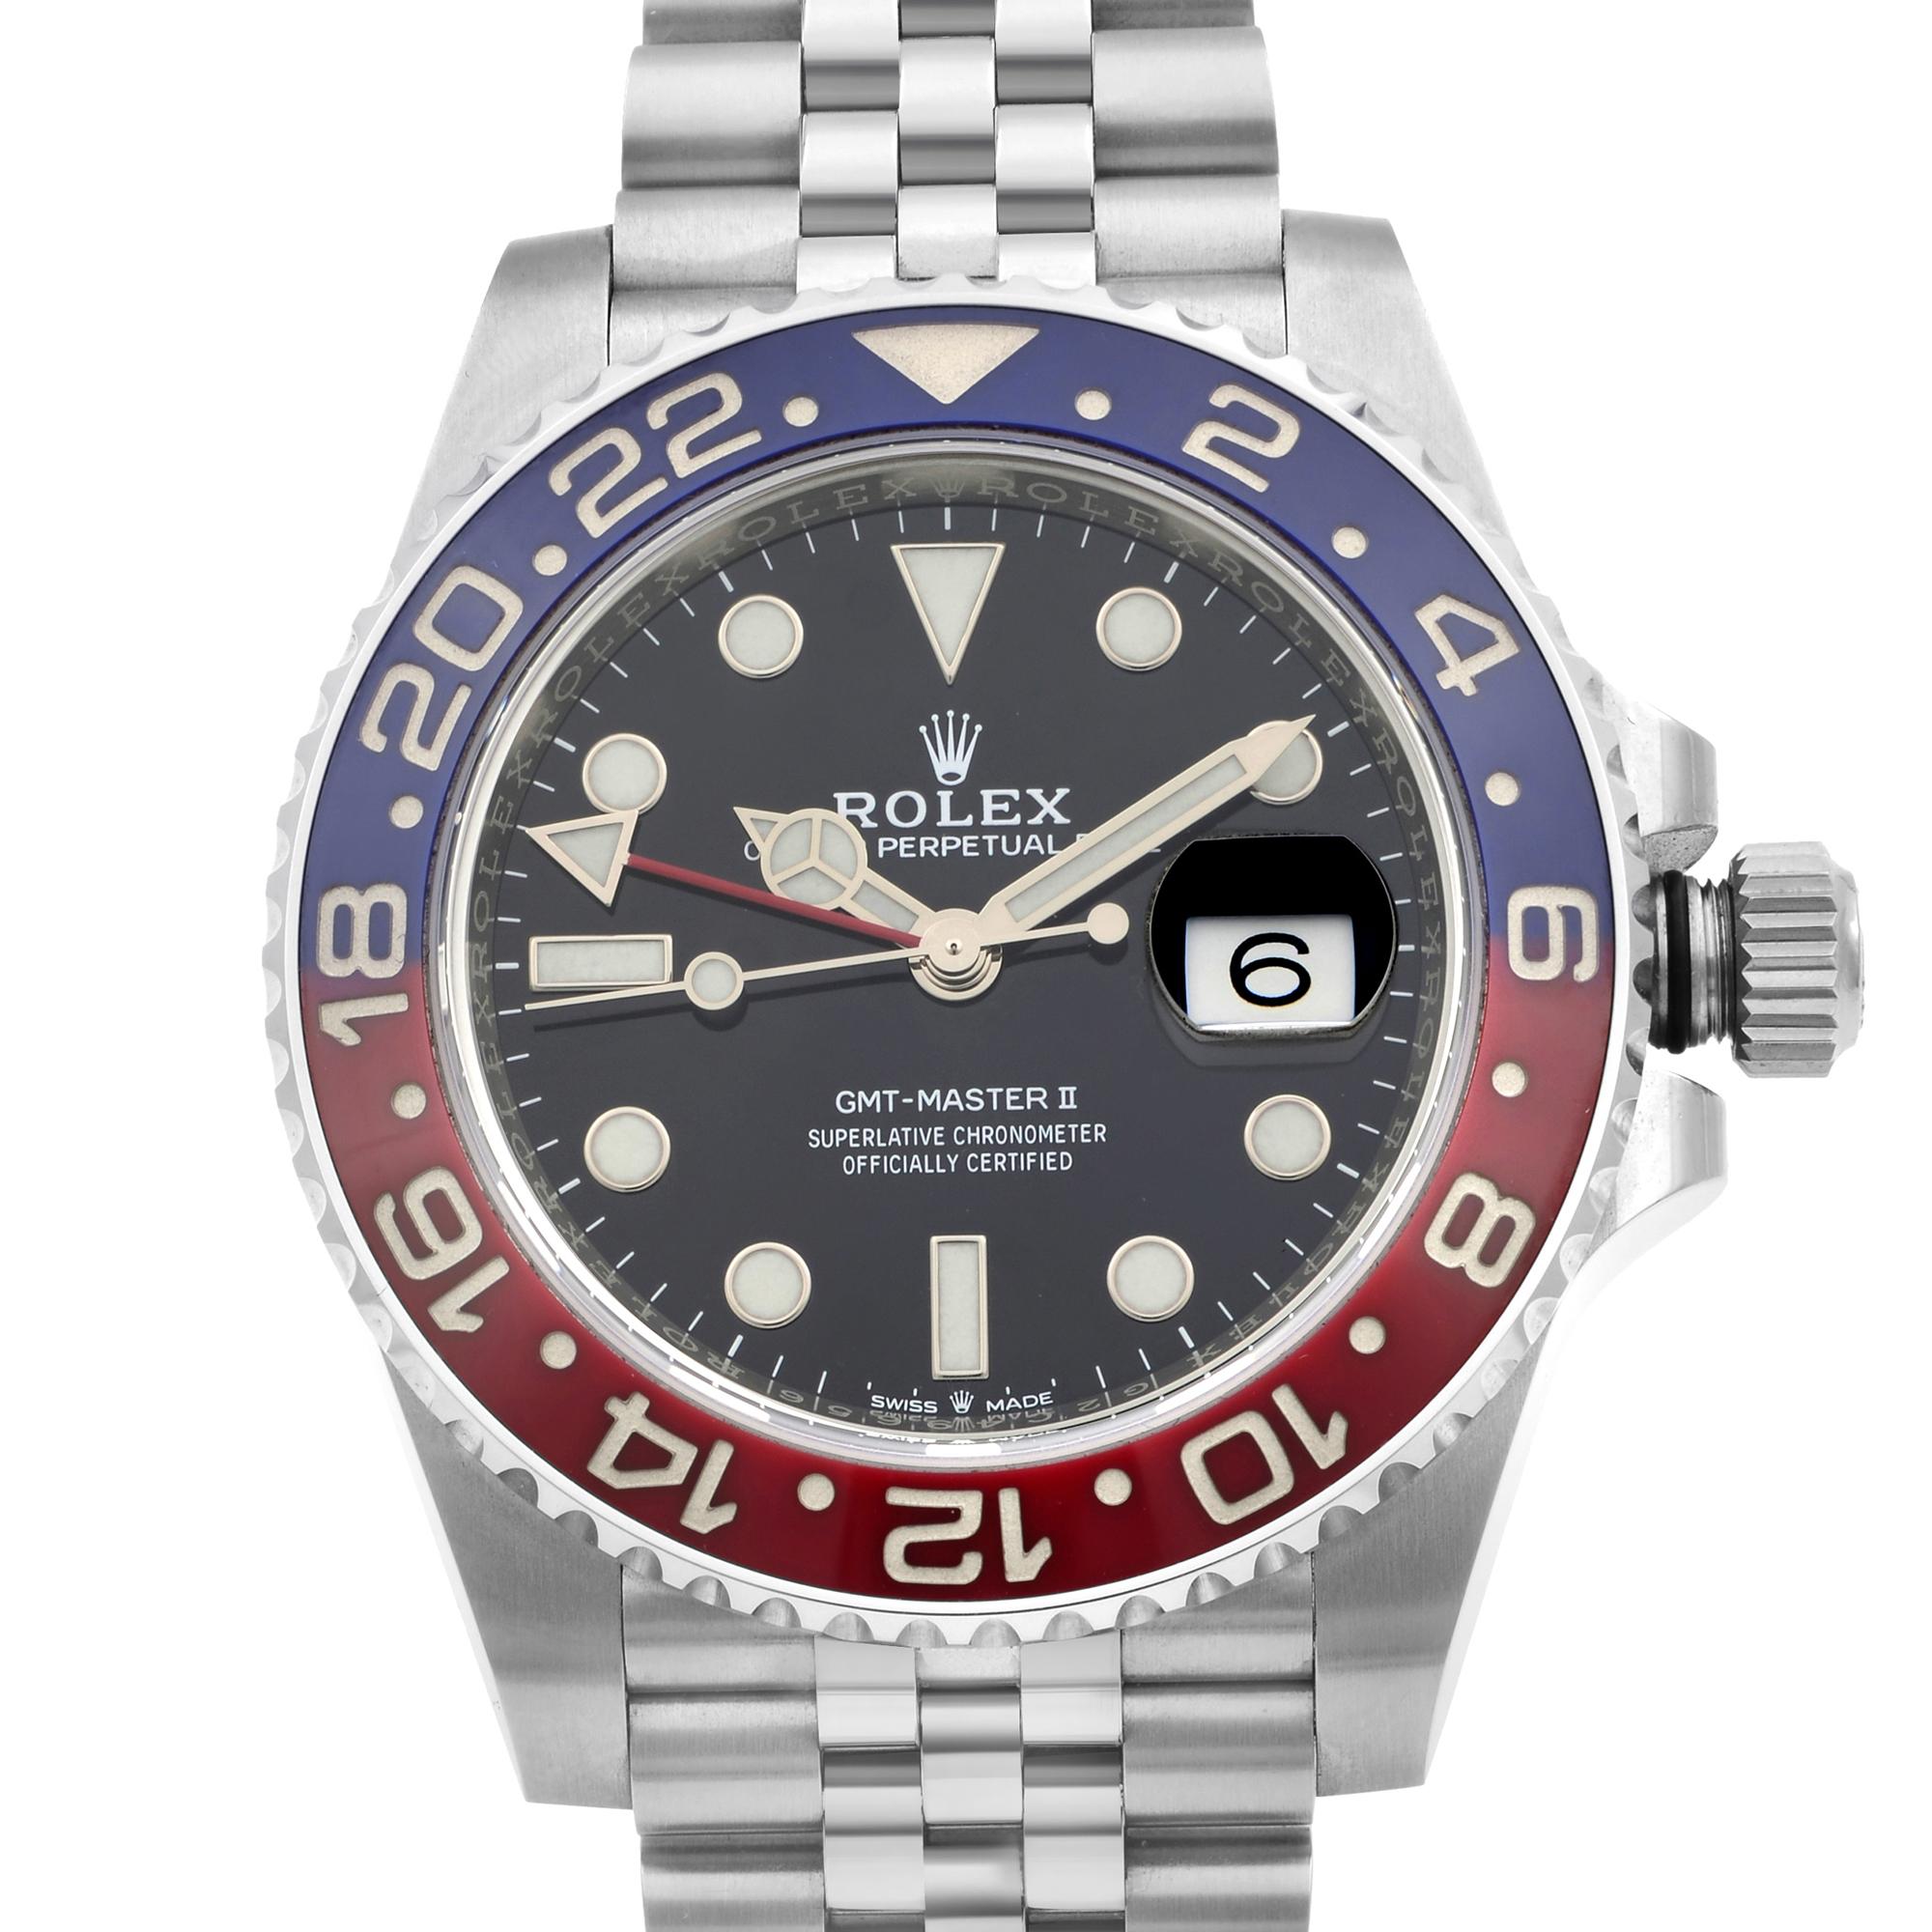 This New Without Tags Rolex GMT-Master II 126710BLRO is a beautiful men's timepiece that is powered by mechanical (automatic) movement which is cased in a stainless steel case. It has a round shape face, gmt, date indicator dial and has hand sticks